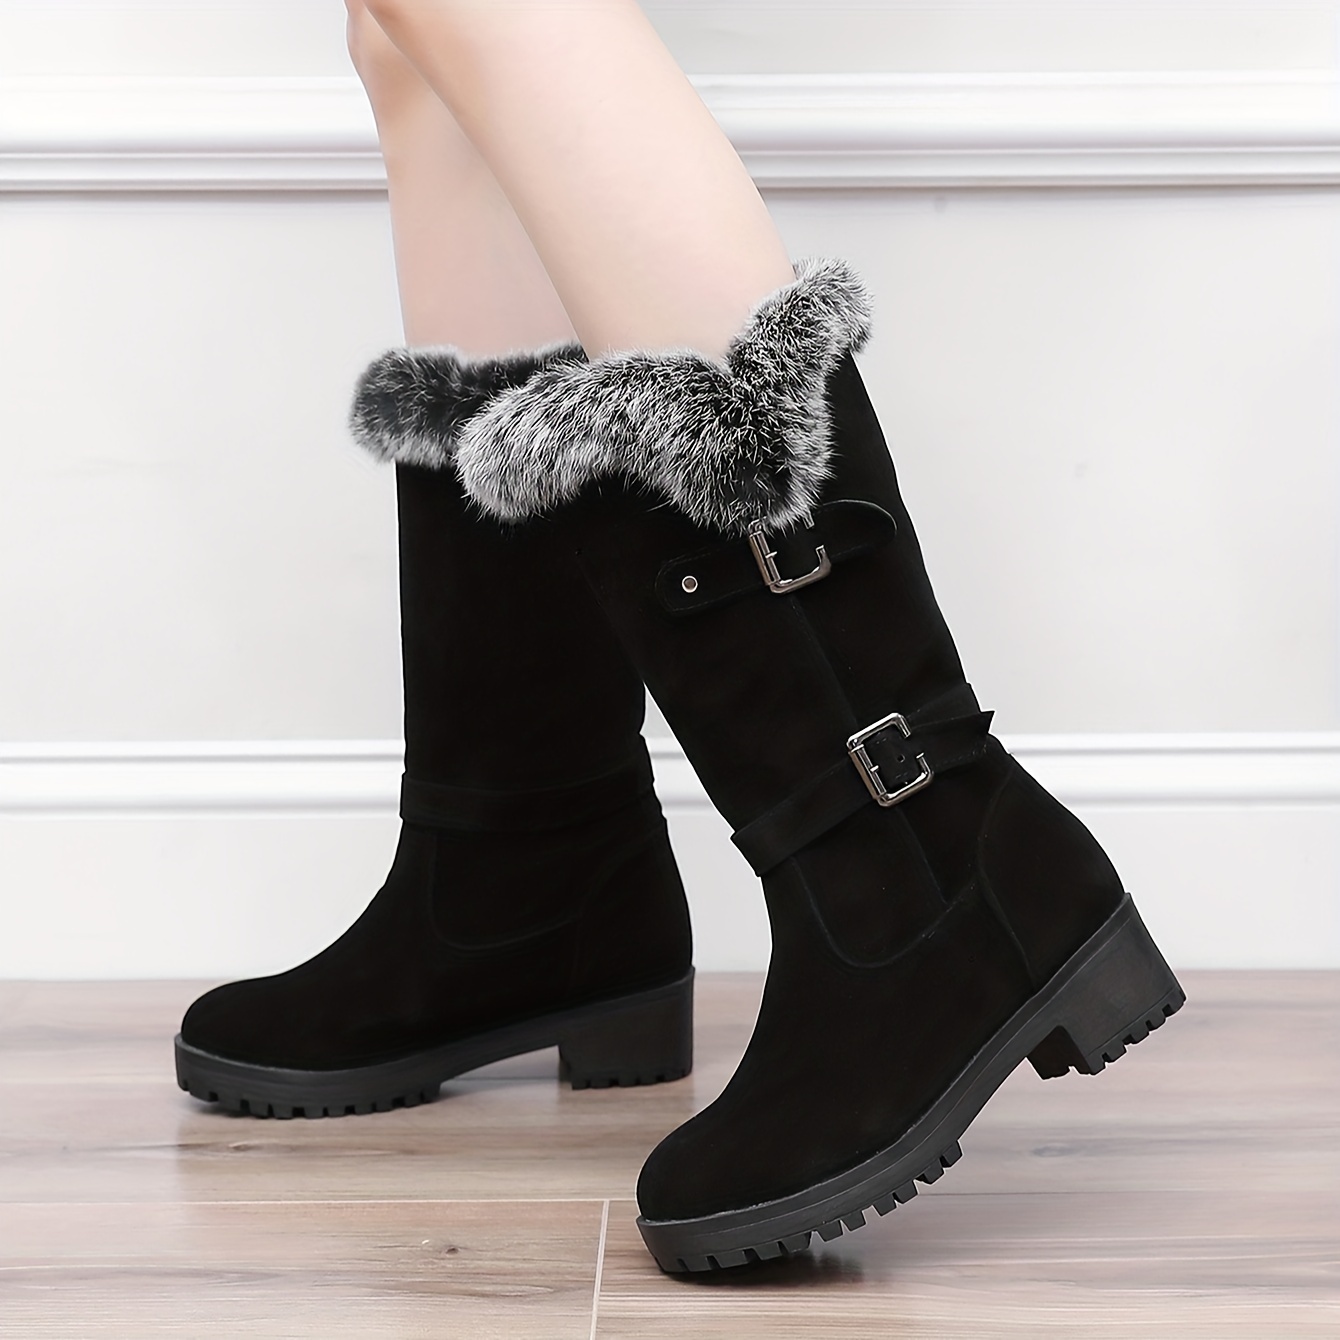 

Women's Faux Fur Lined Snow Boots, Buckle Strap Chunky Low Heeled Mid Calf Boots, Winter Thermal Anti-slip Shoes